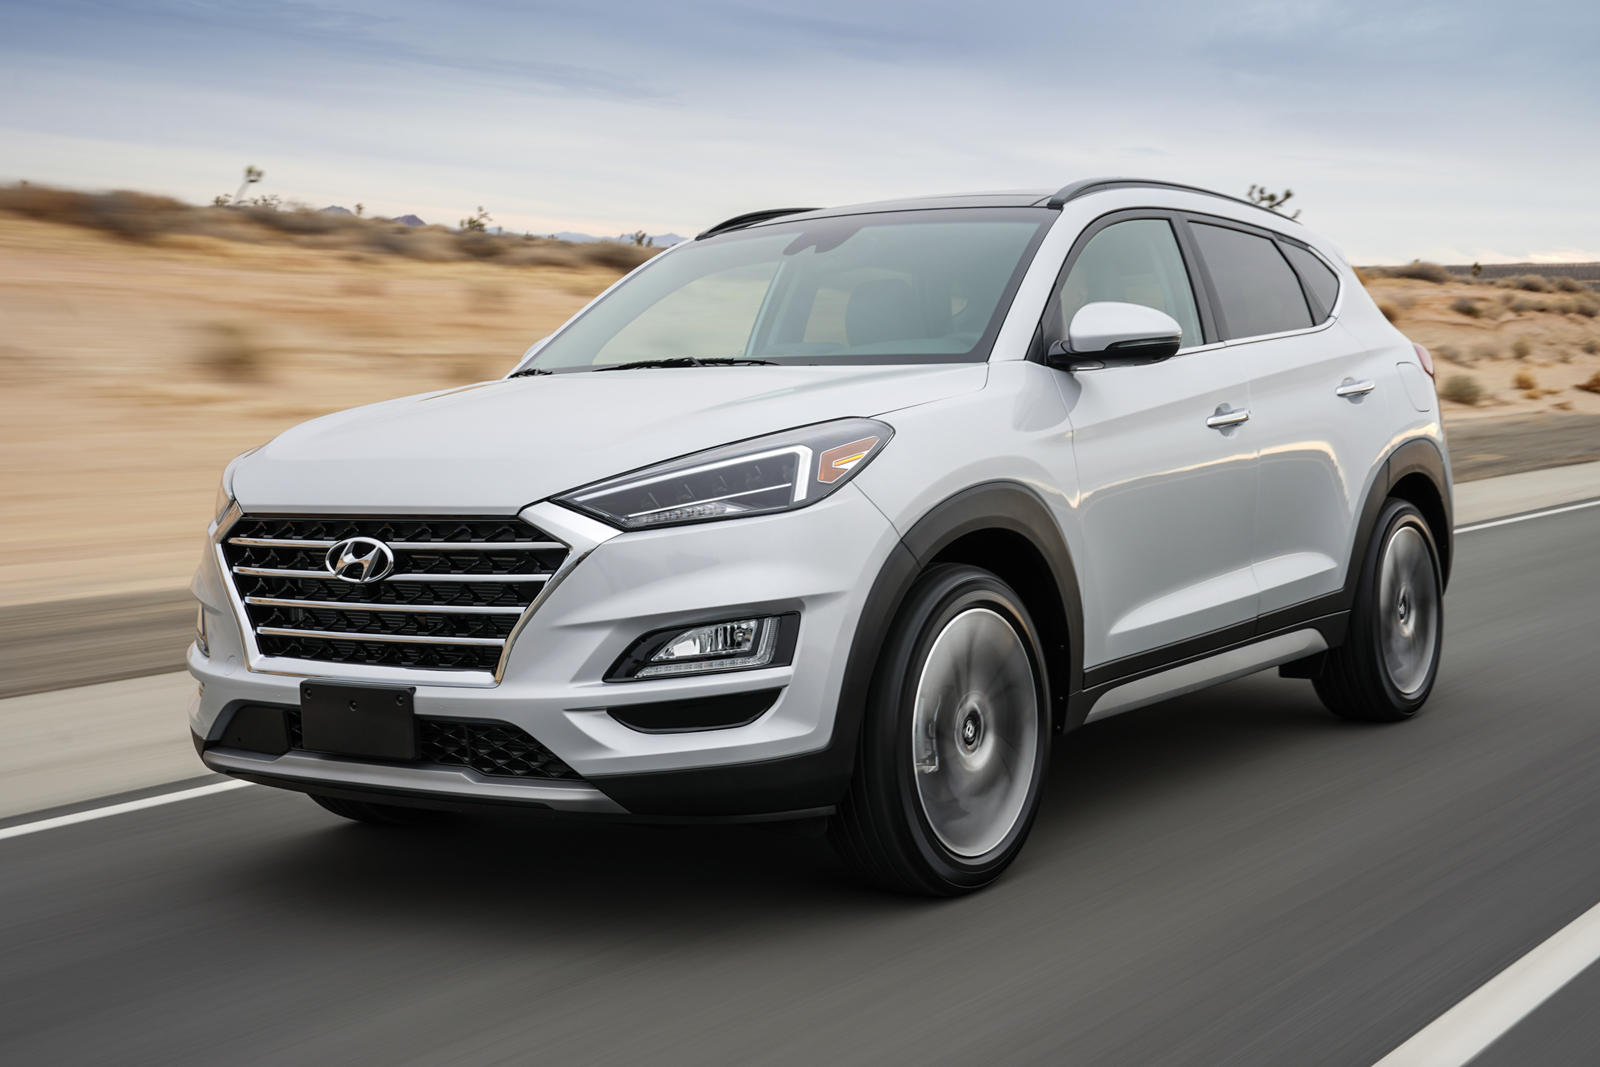 Used Hyundai Tucson Green For Sale Near Me Check Photos And Prices 